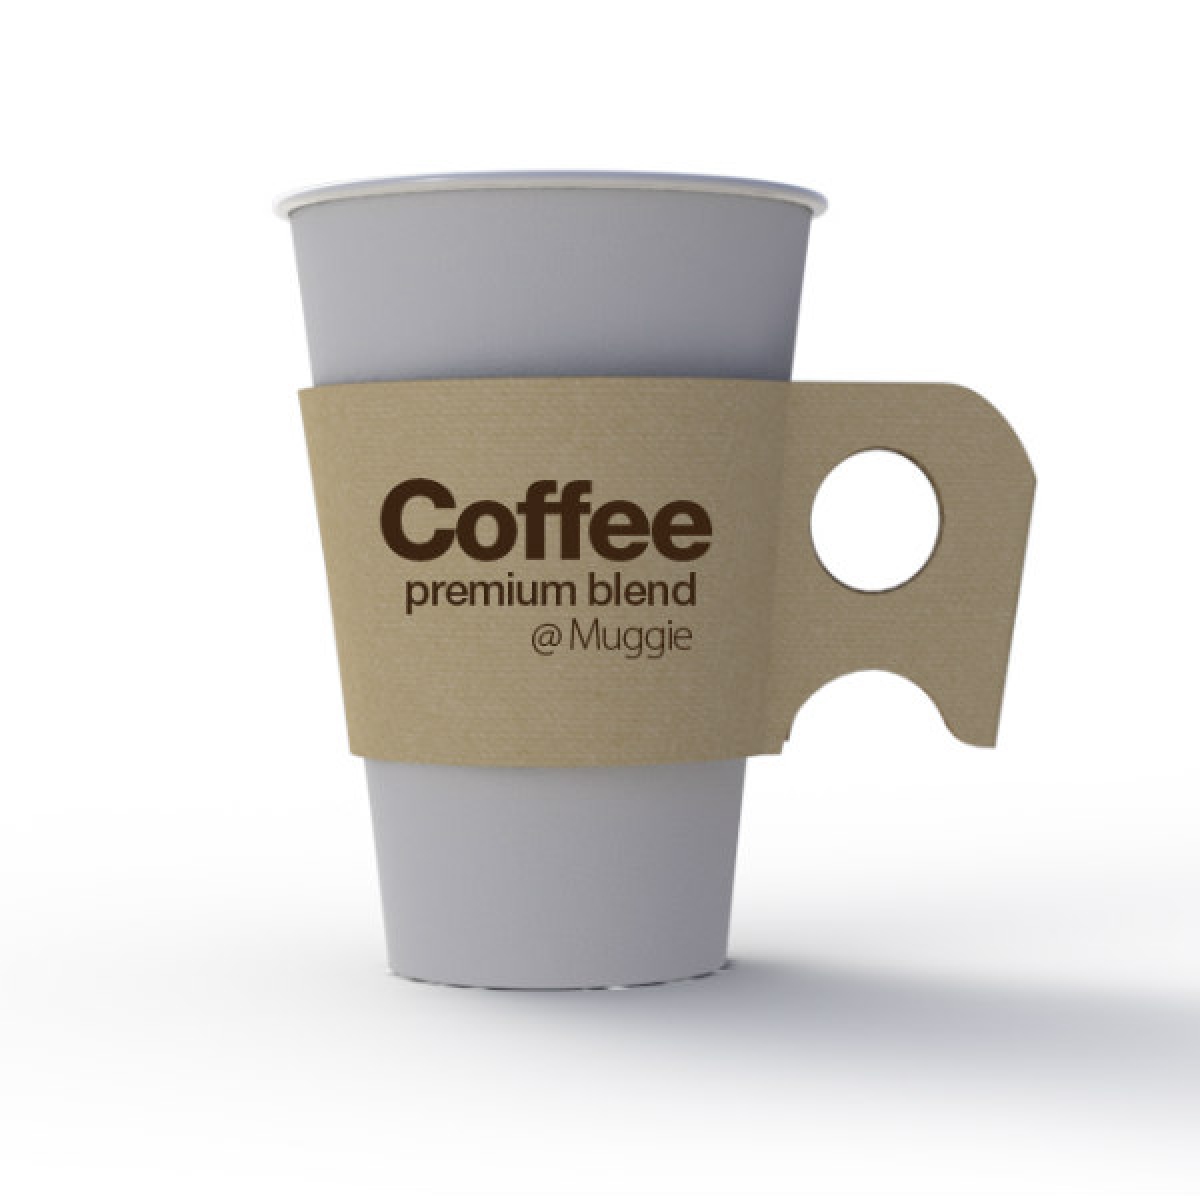 paper cup with handle 7 oz / 72*77